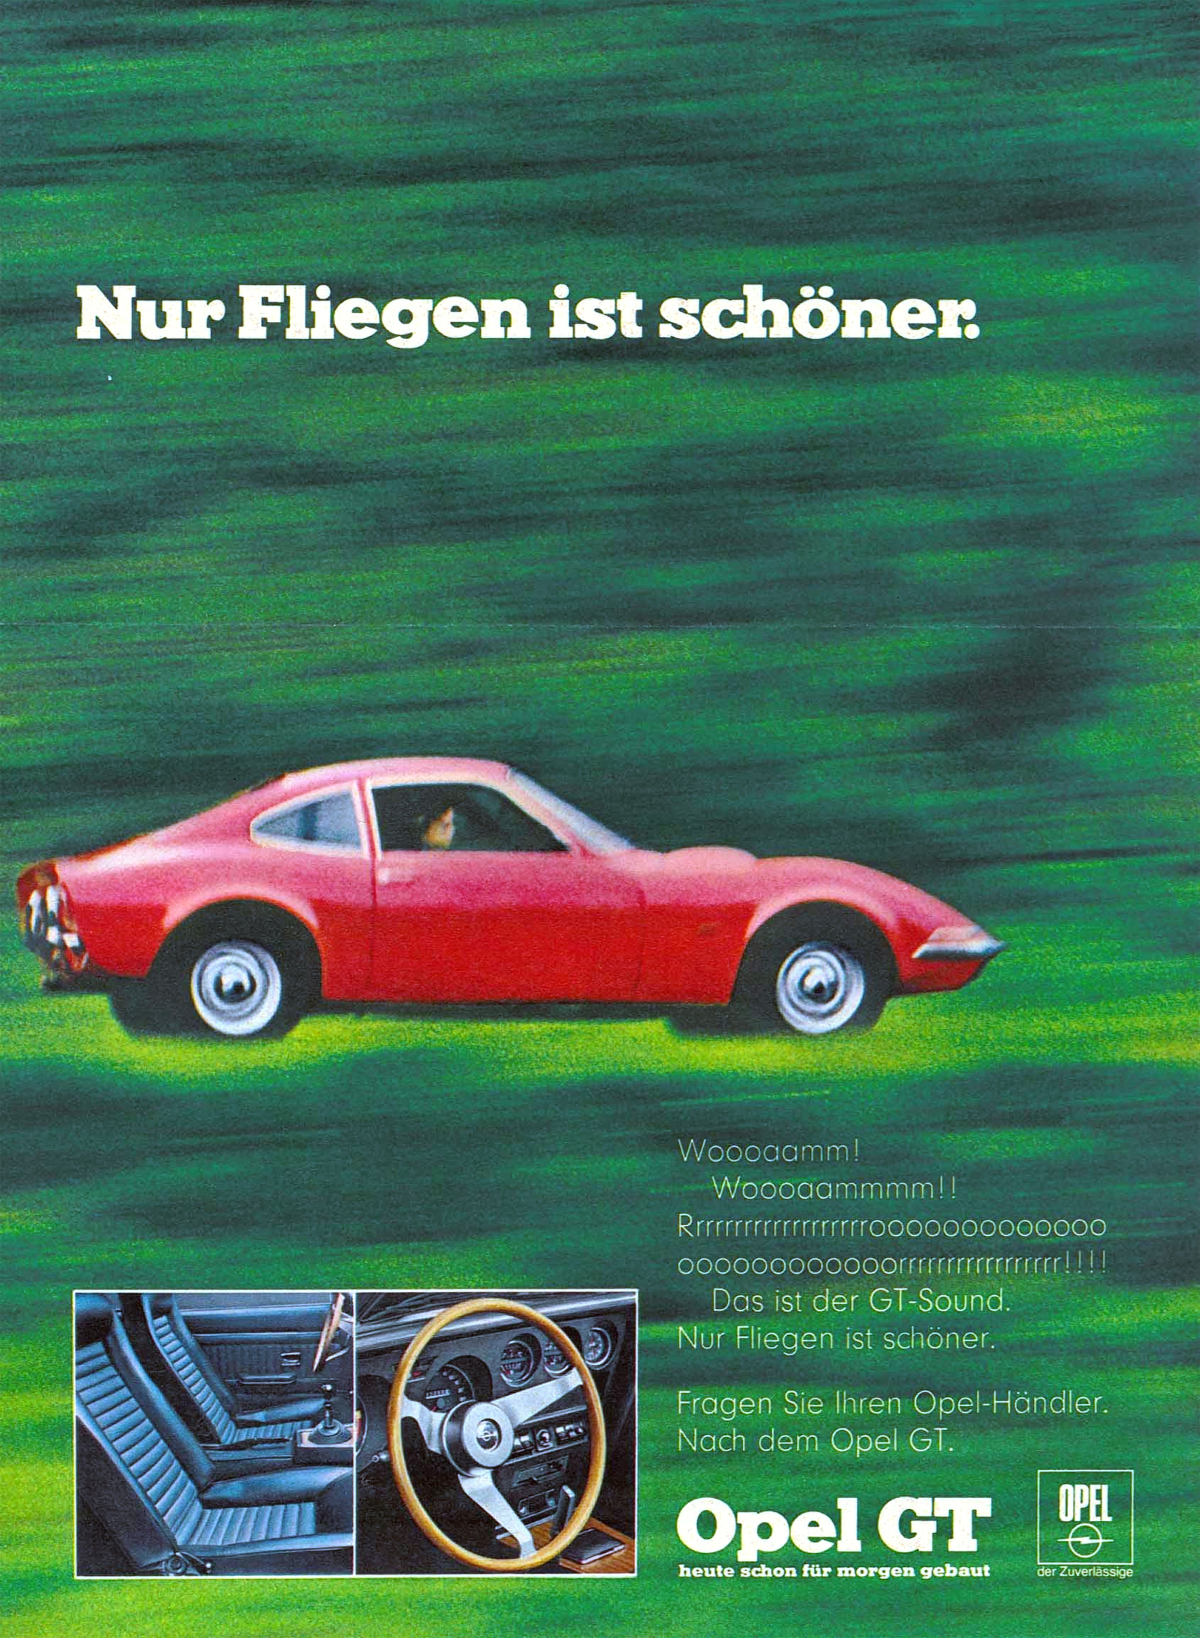 Eternal advertising slogan: The four words “Only flying is better …” describe the Opel GT experience and continue to arouse emotions today.